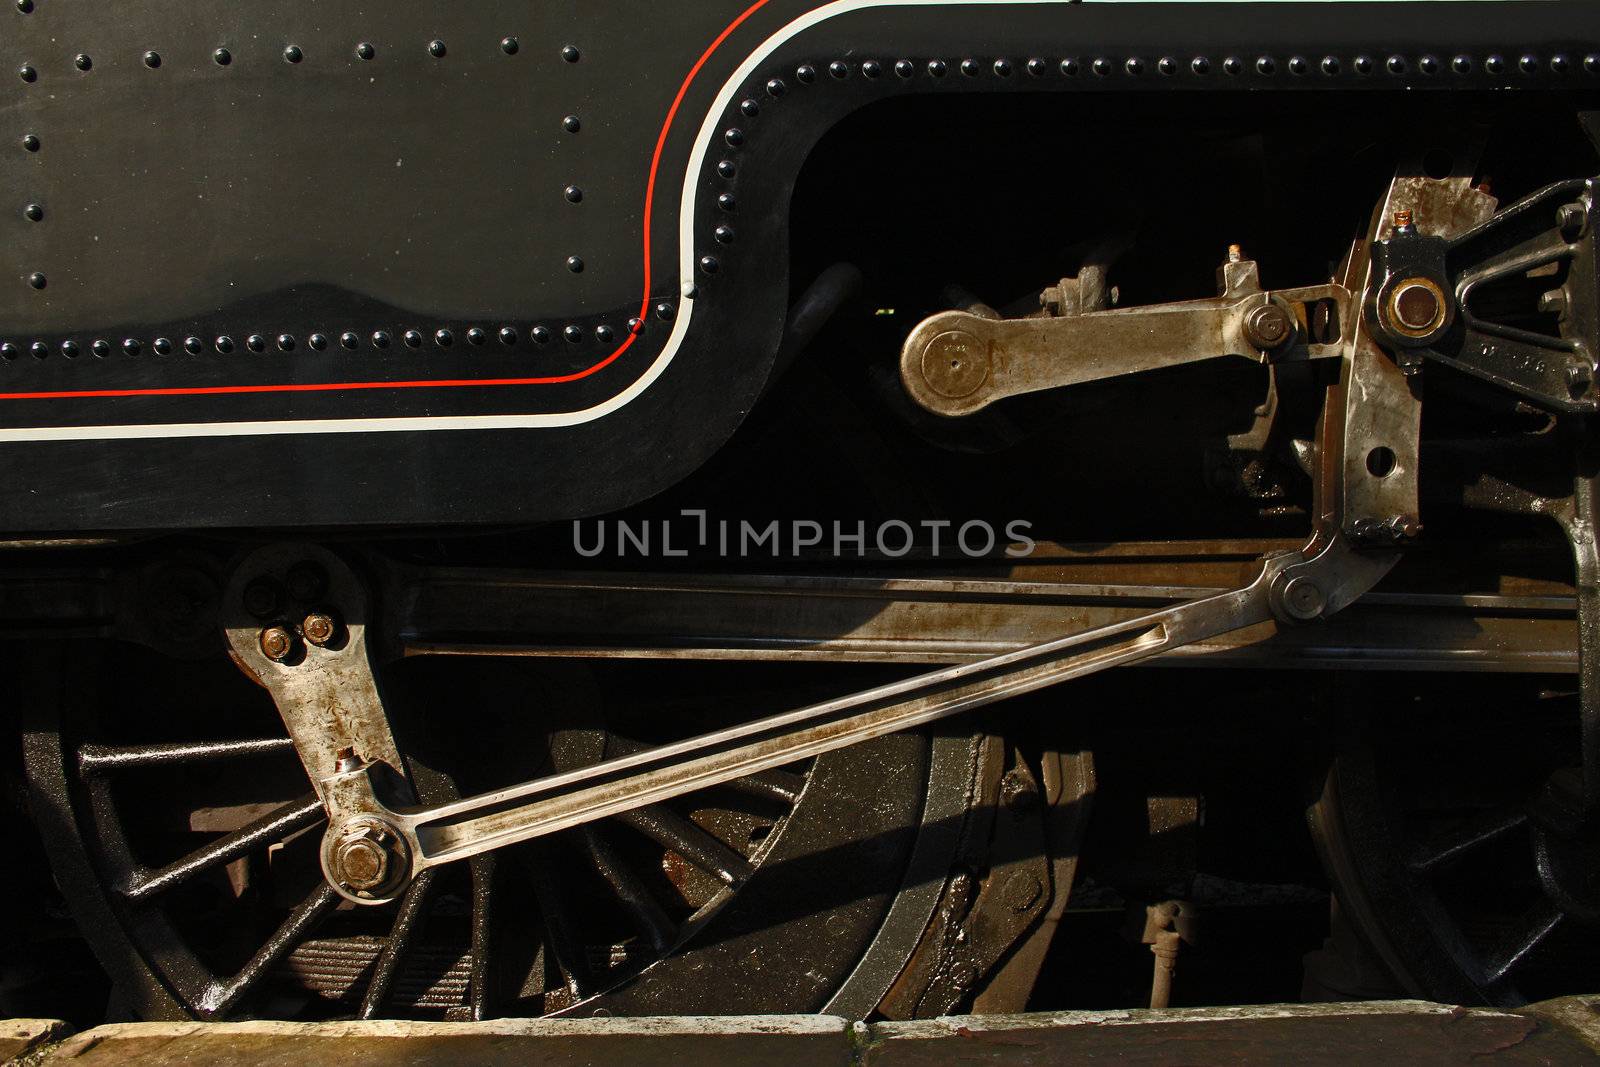 View of drive shaft and brake pad of a steam engine locomotive